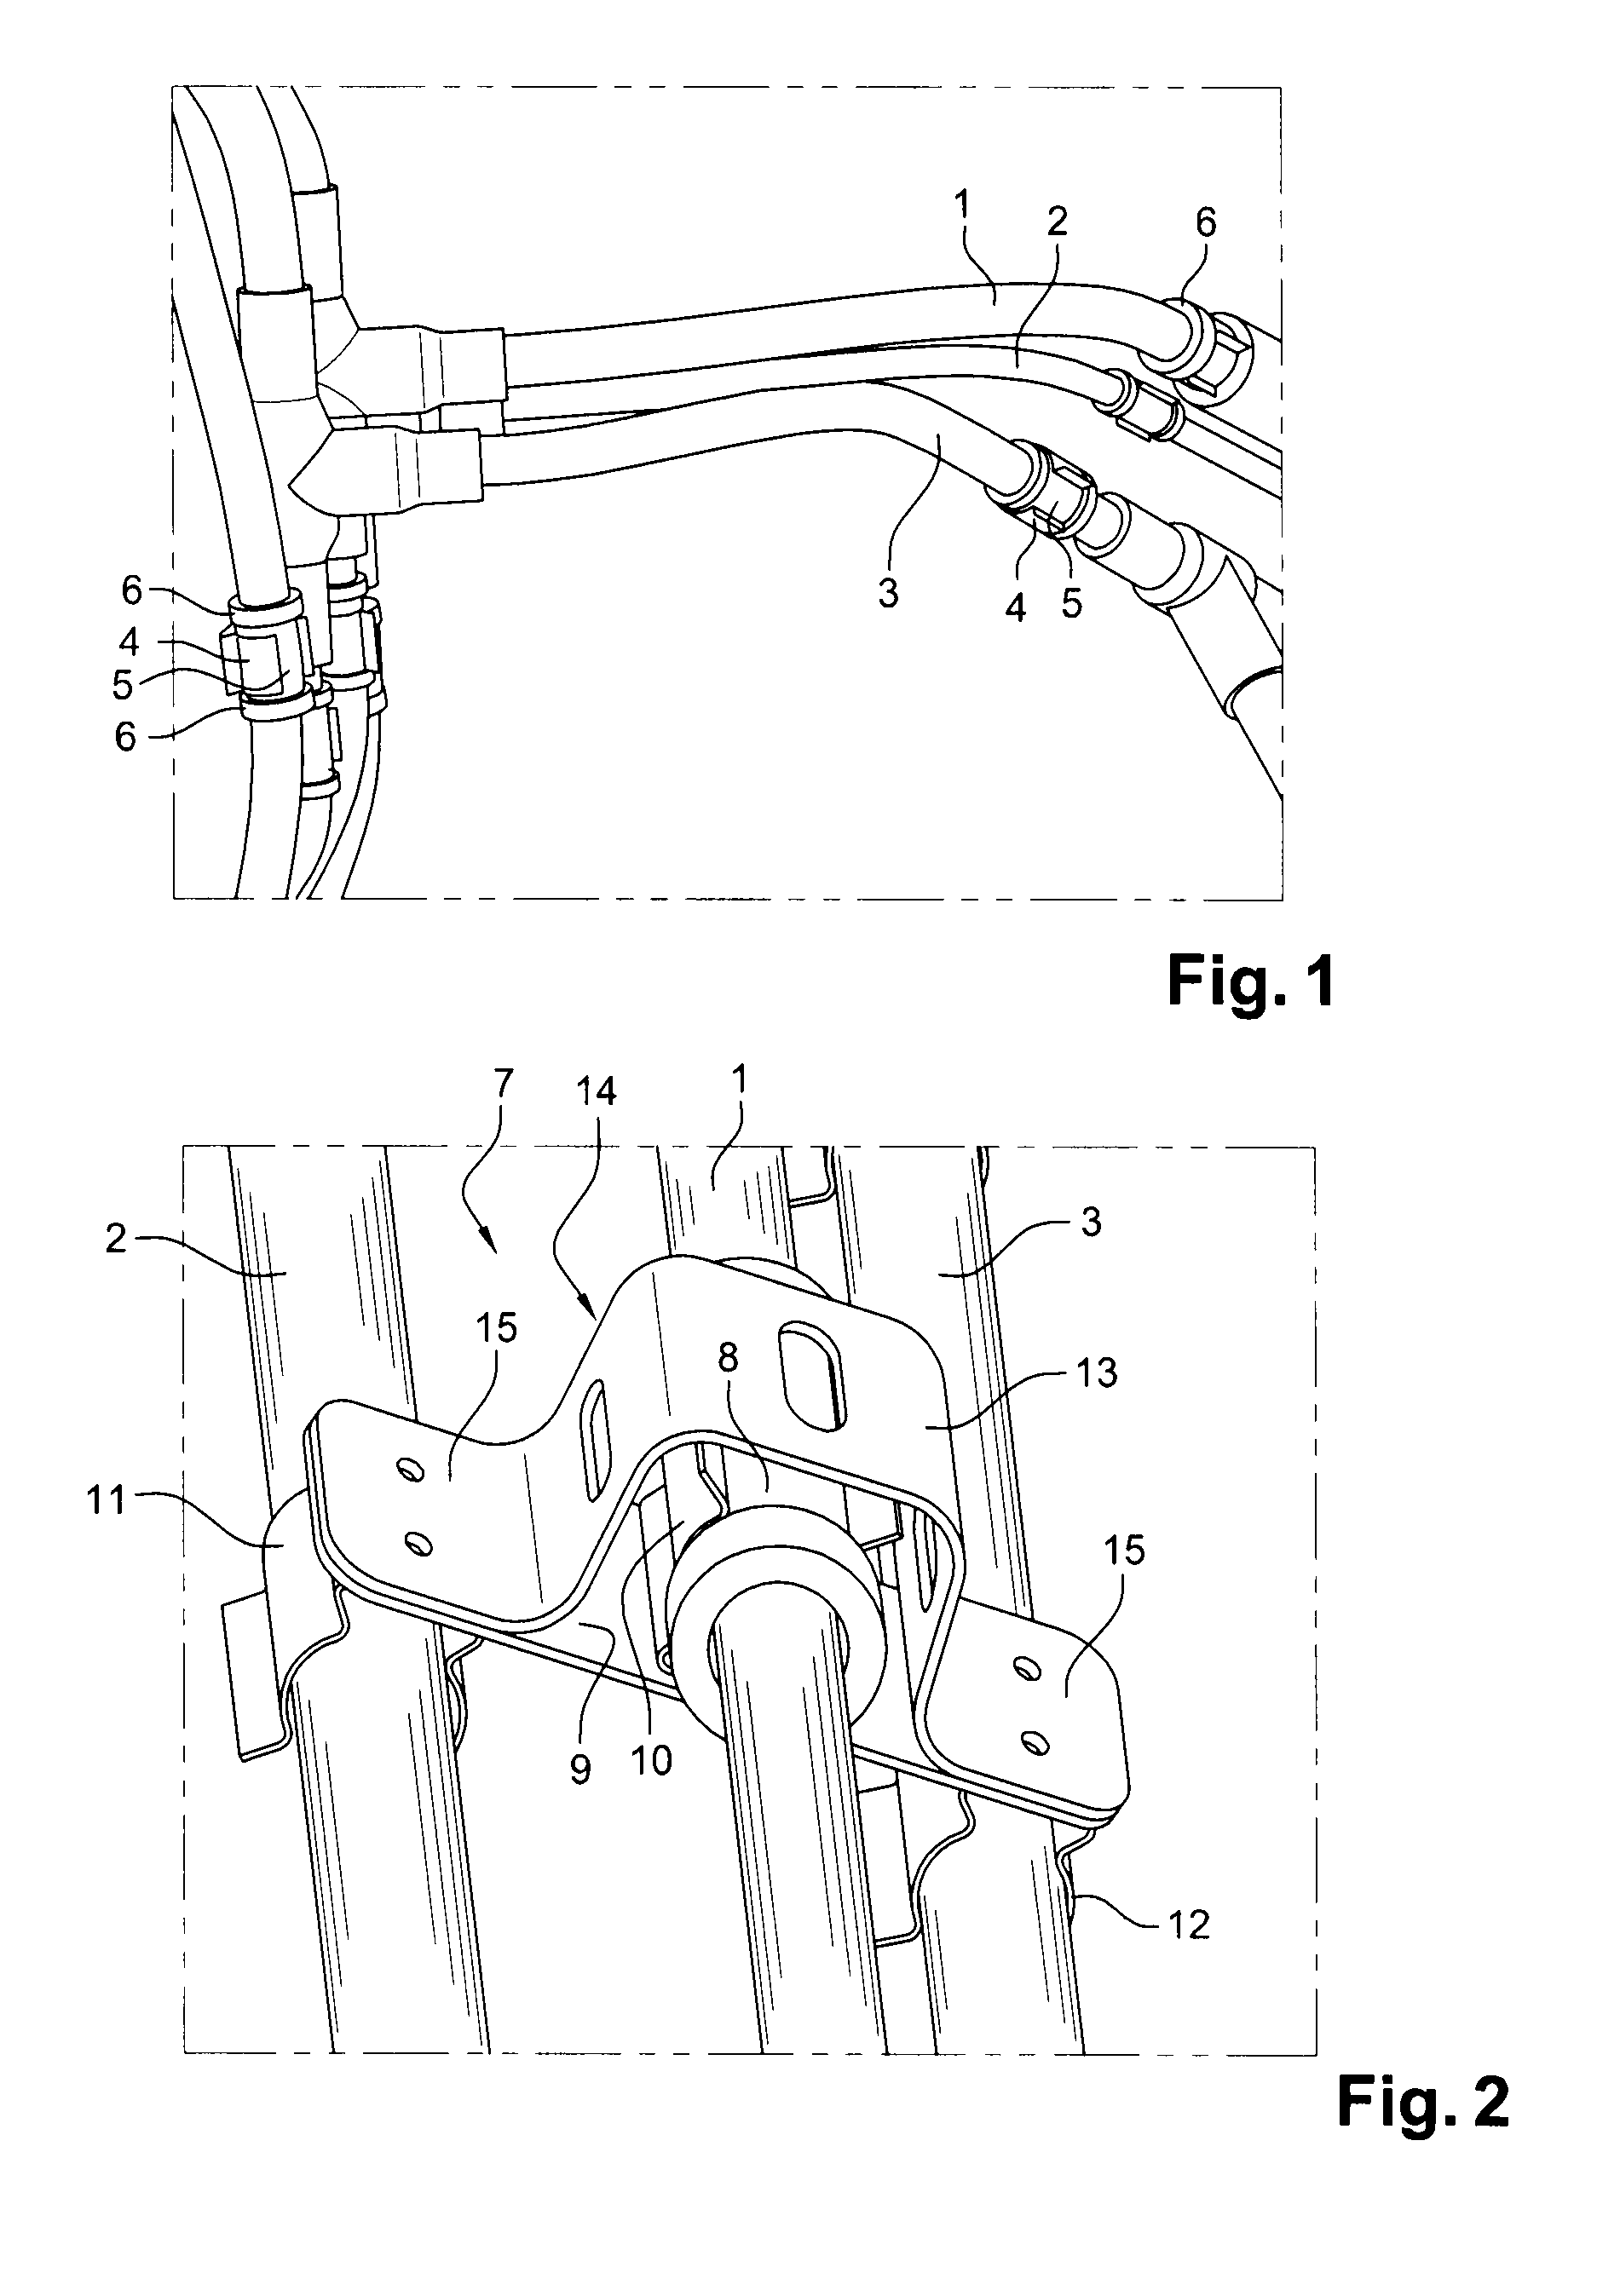 Device for spacing electrical harnesses in a turbomachine